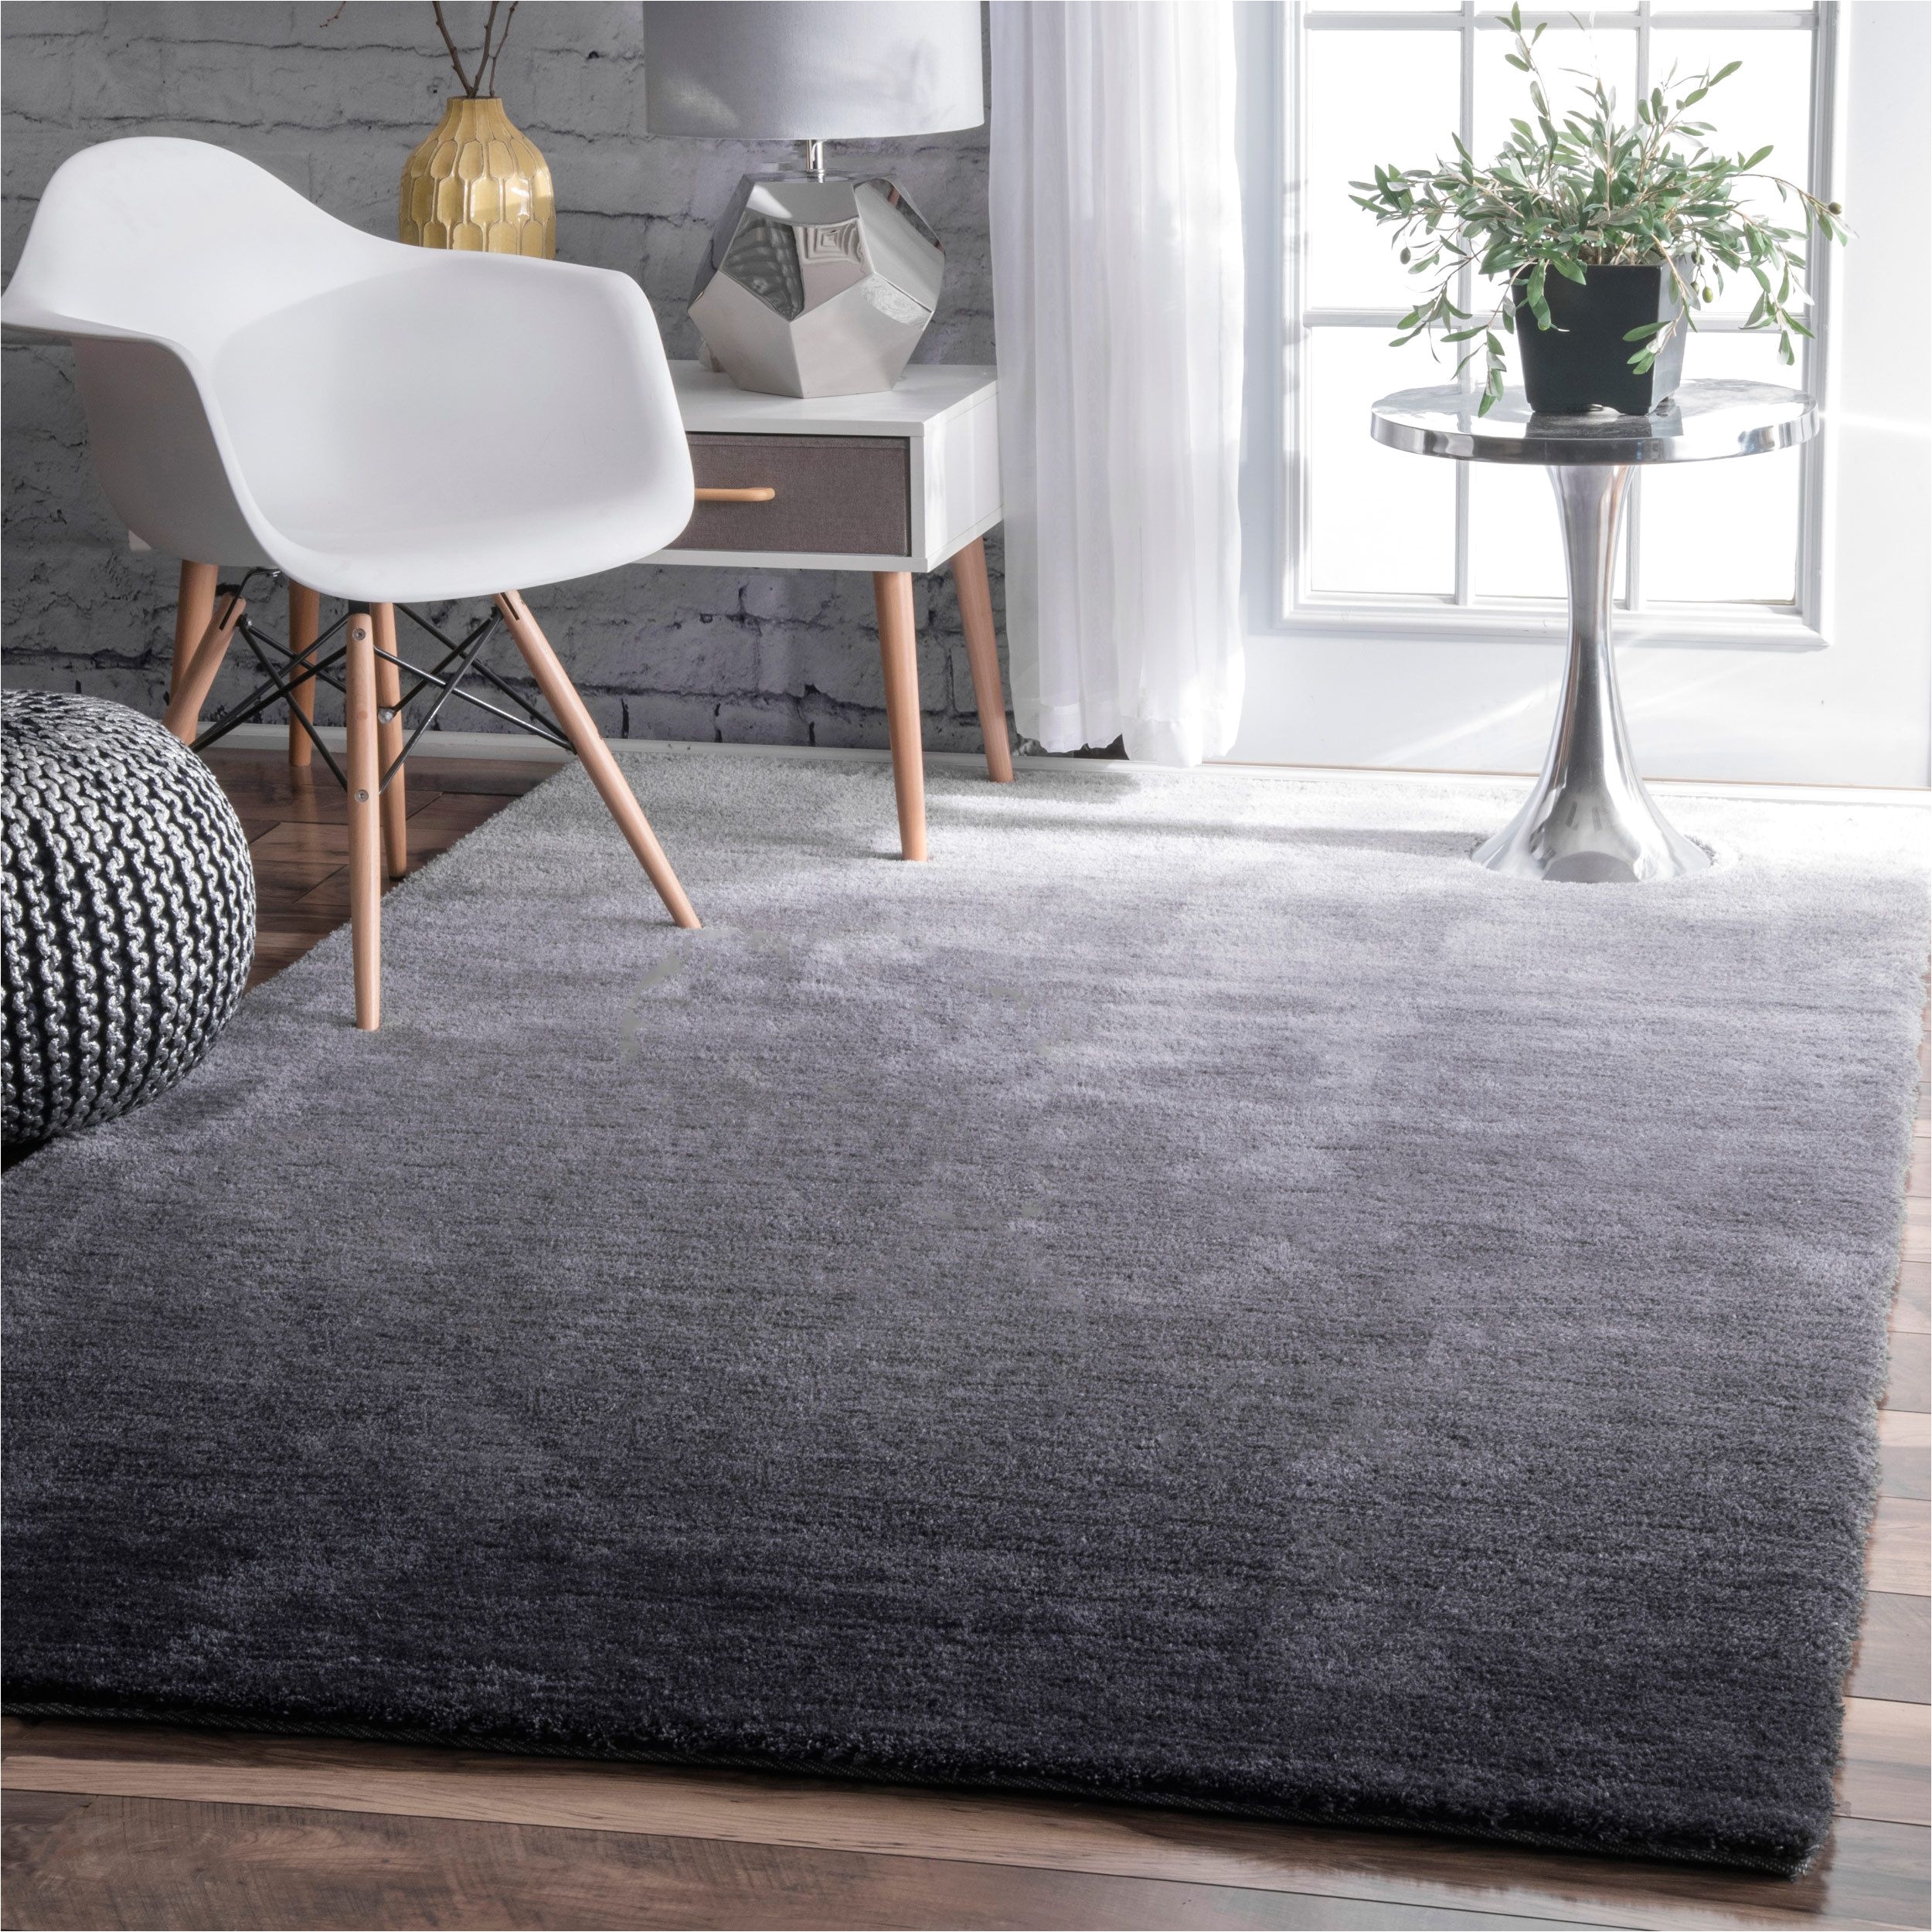 nuloom handmade soft and plush ombre grey shag rug 5 x 8 grey size 5 x 8 synthetic fiber solid